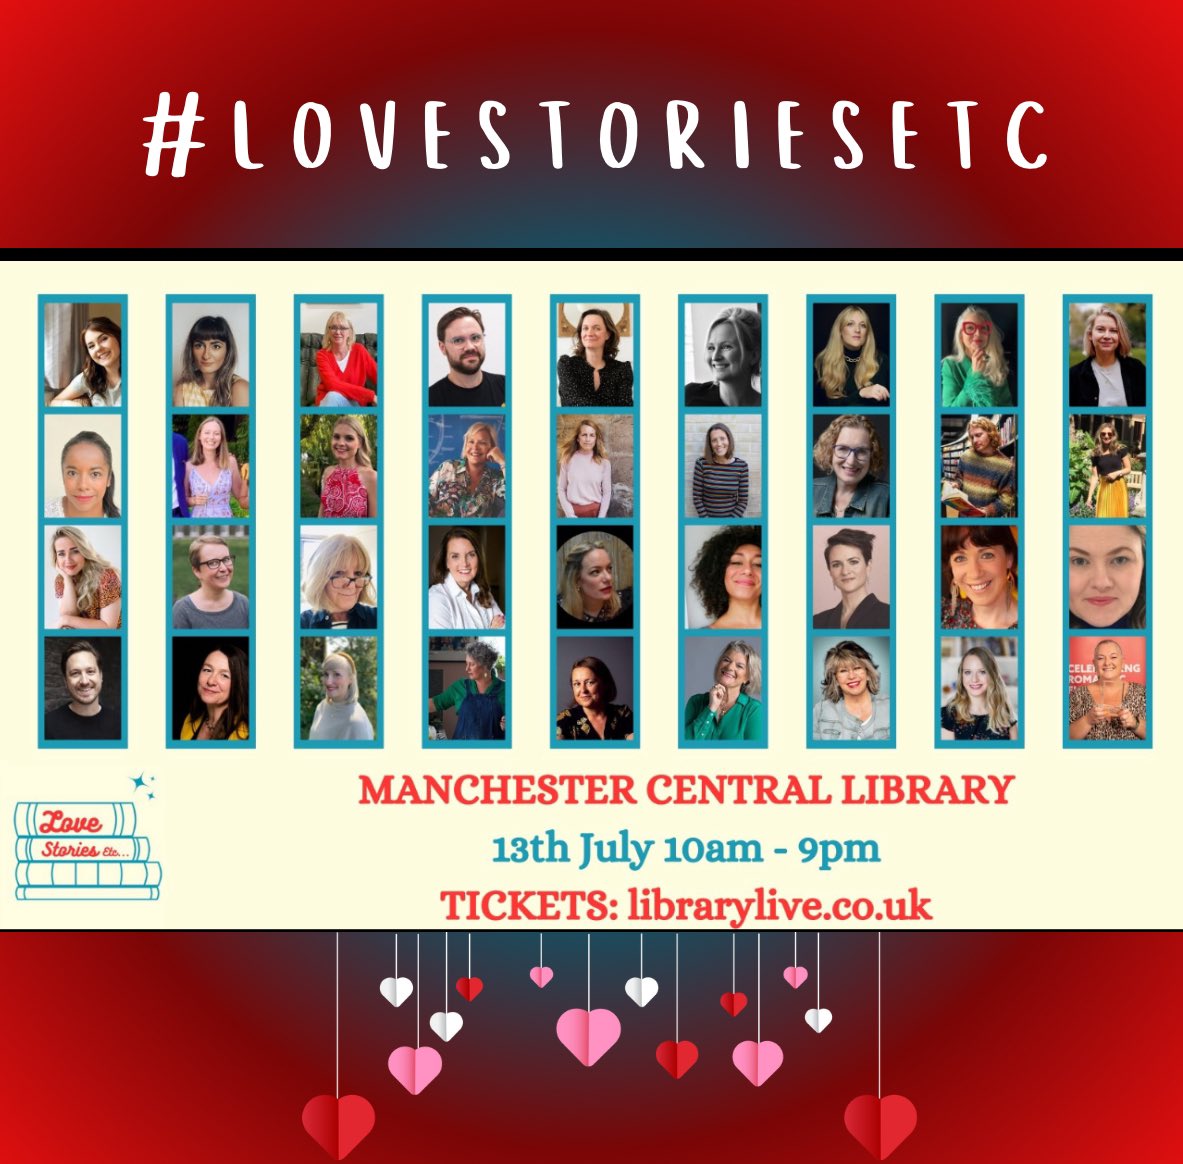 A festival of romance writers in Manchester #lovestoriesetc - writers, talks, workshops! librarylive.co.uk/event/love-sto…